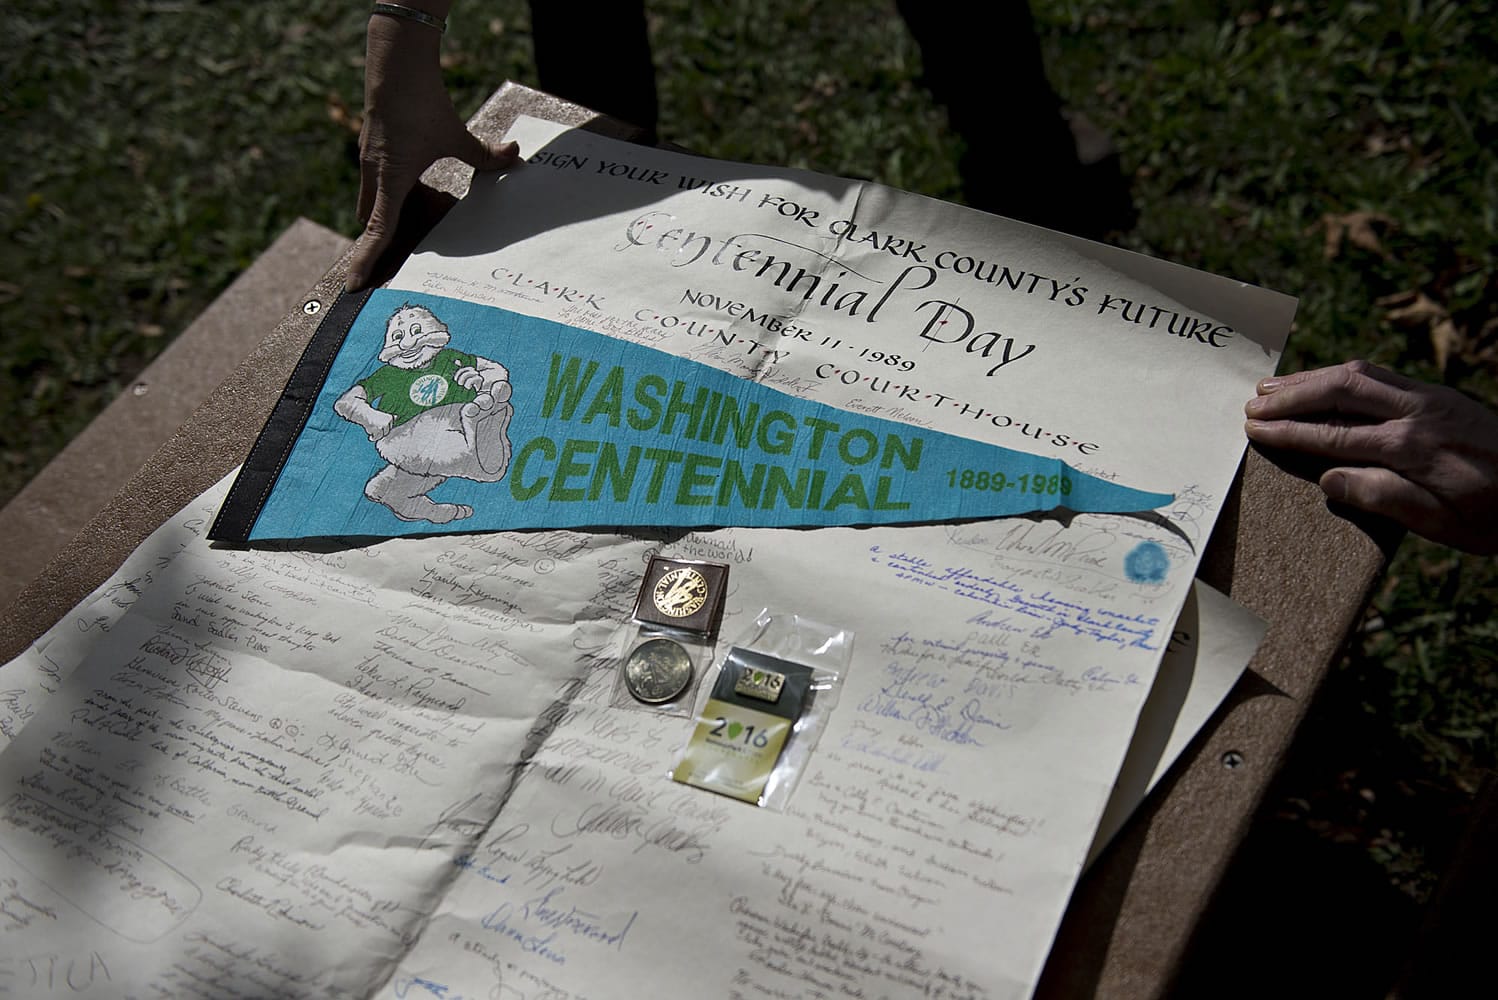 Items from a 1989 time capsule are displayed along with a 2016 National Park Service Centennial pin to be put into the new time capsule, which will be buried at the foot of the relocated monument.